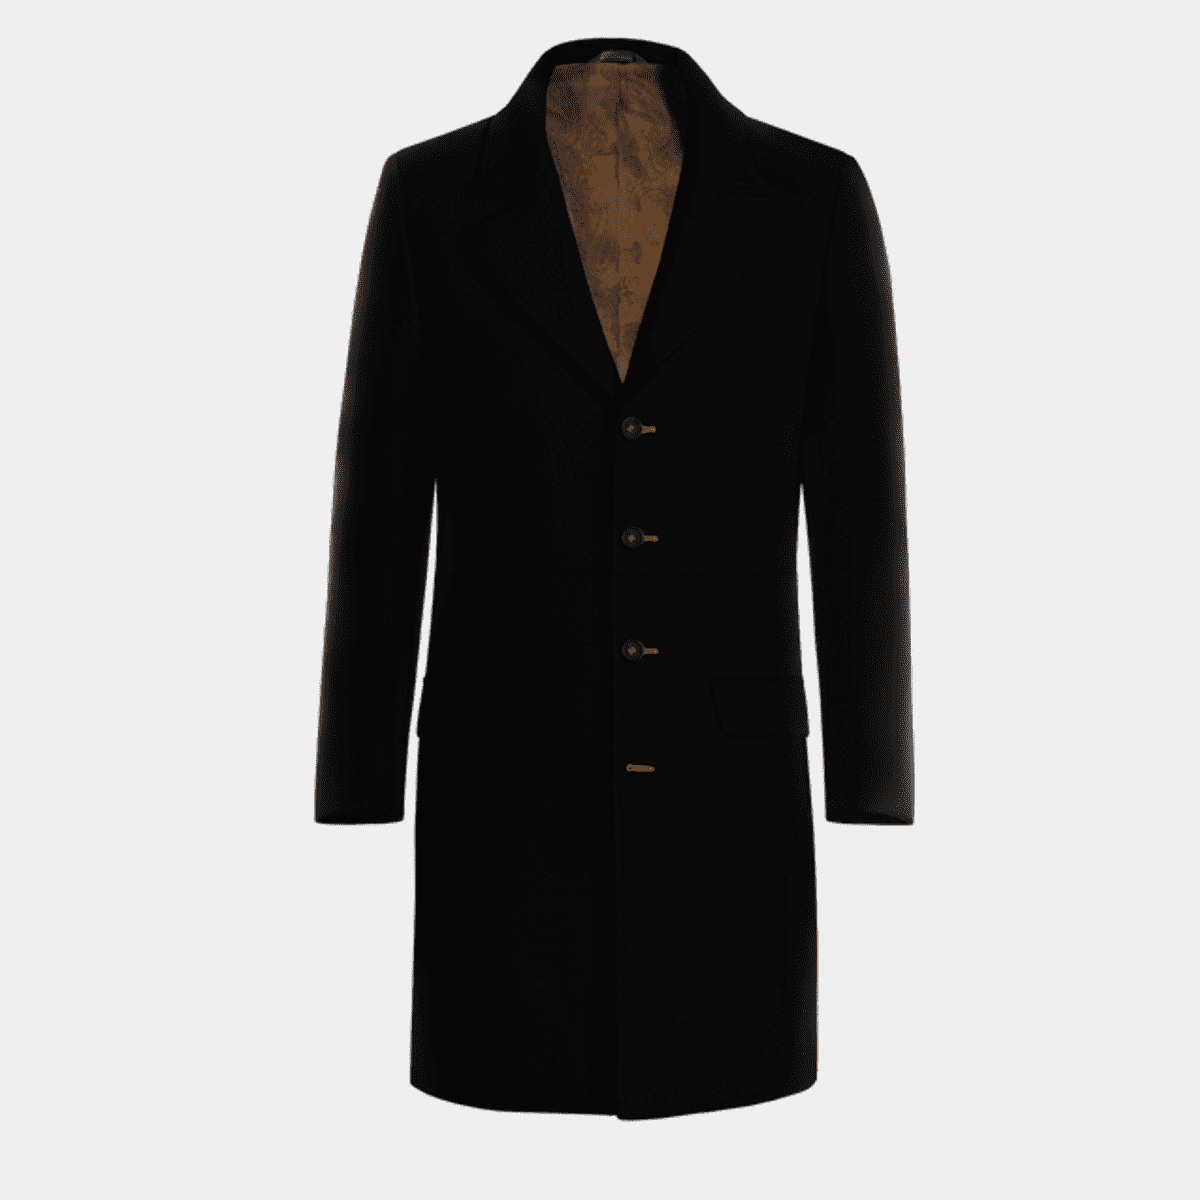 Black Long Overcoat with contrasted Buttonthreads | Hockerty